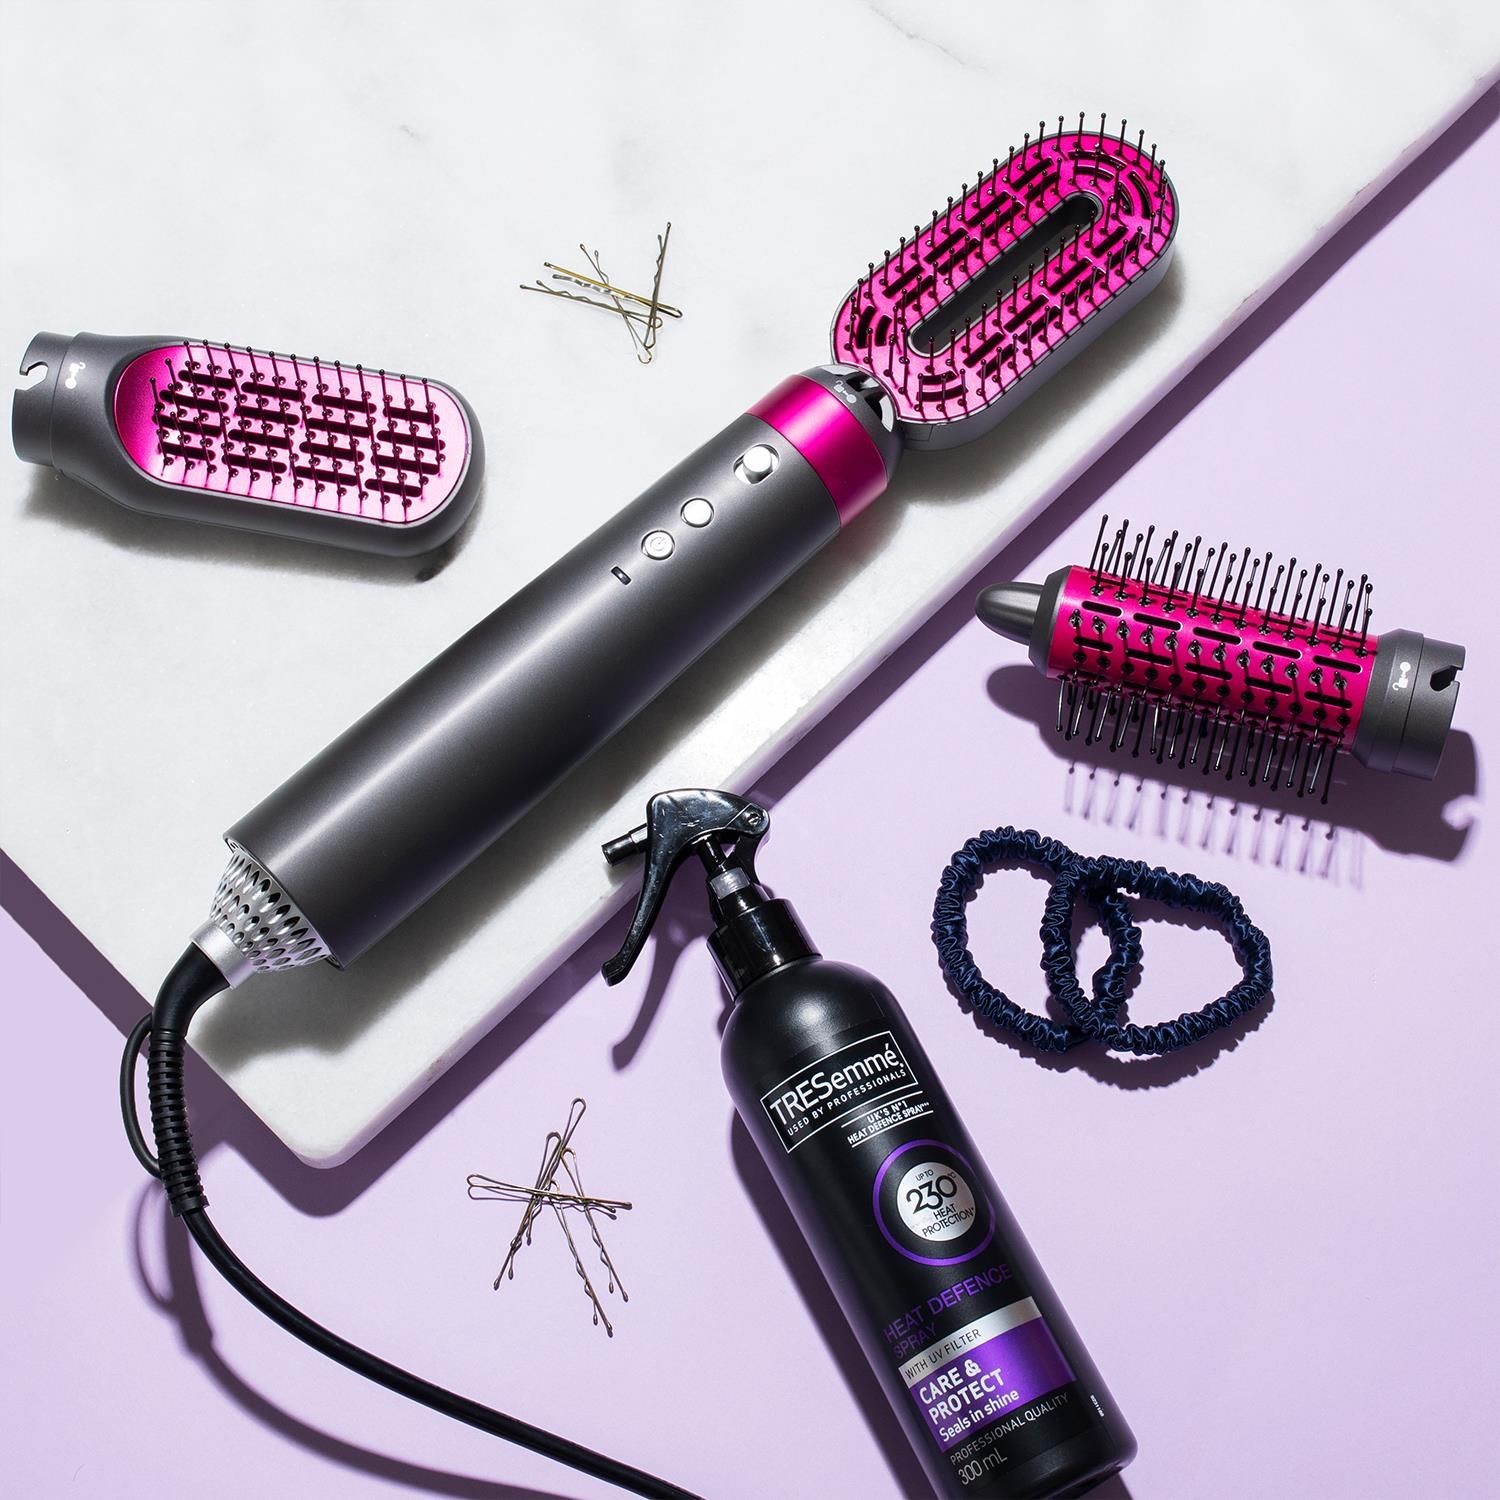 All of your hairstyling needs in one tool with the envie 3 in 1 Hair Styling Brush!  With three interchangeable combs, including a 12cm styling brush for curling, 14cm brush head for straightening and a 15cm brush for blow-drying – enjoy a variety of looks from one tool.

Key Features: 
3 interchangeable combs
Hair curling, straightening and drying
One button temperature control
3 heat settings – hot/warm/cool
2 speed settings – high/low
Led light indicator for temperature settings
Max. power: 900 watts